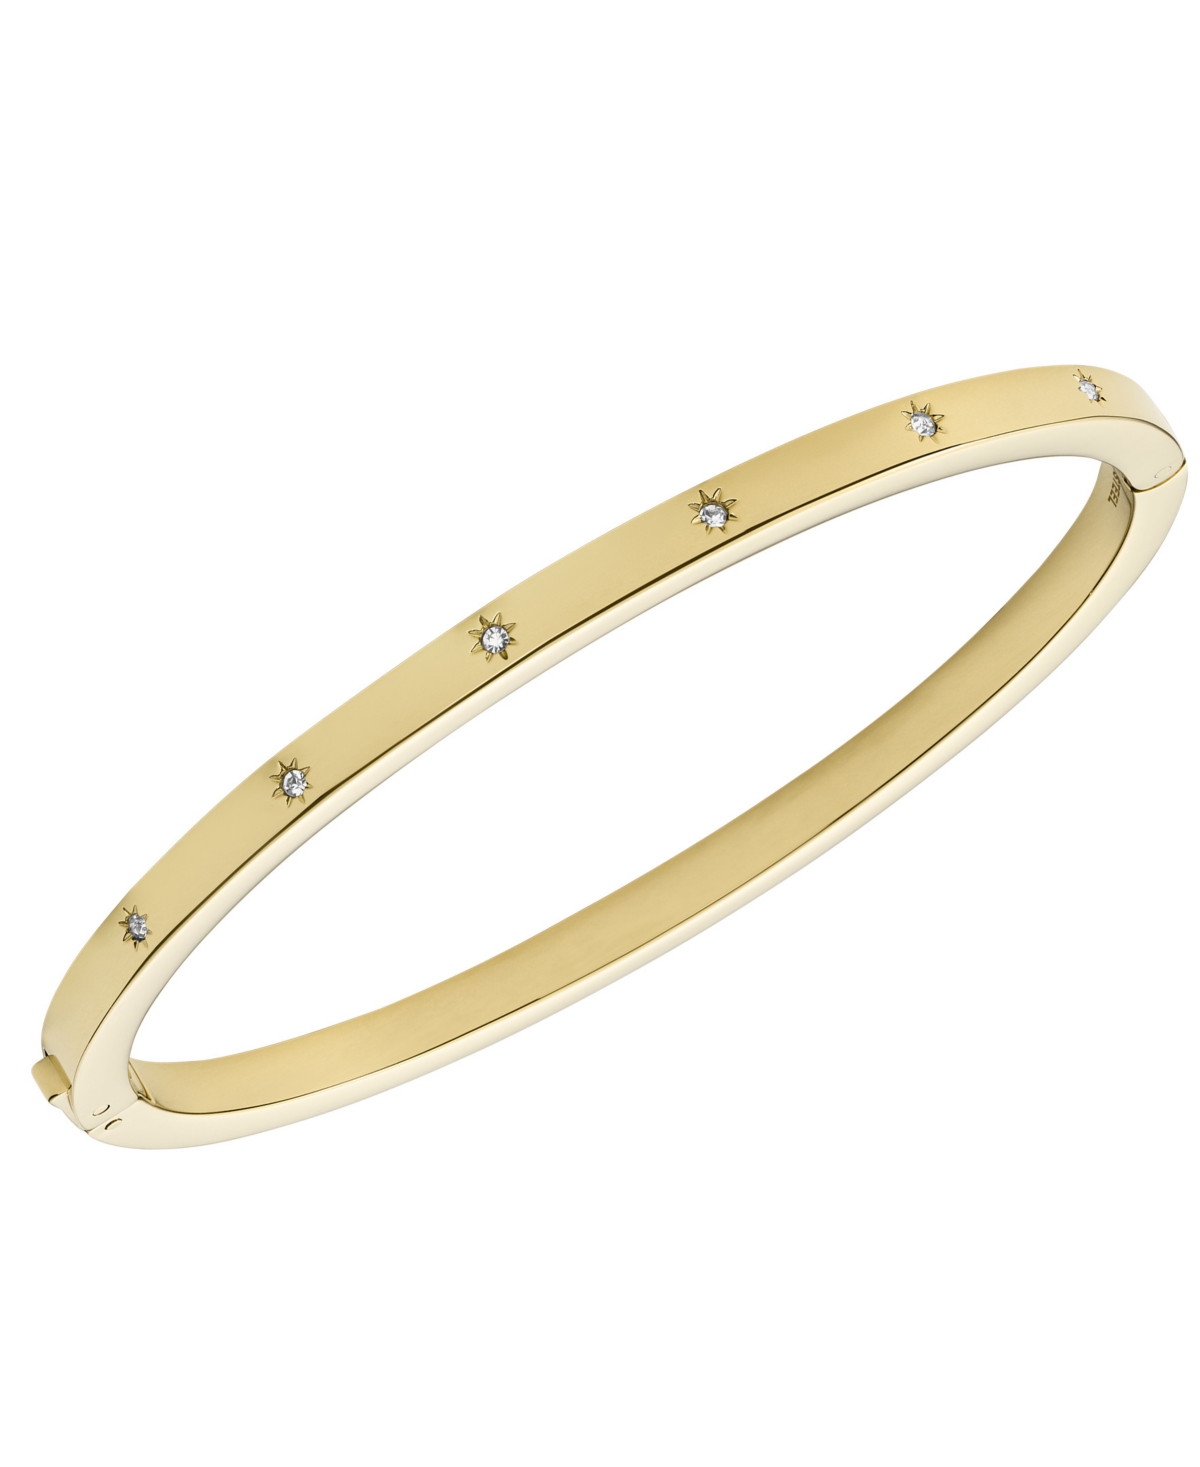 Fossil Sutton Shine Bright Stainless Steel Bangle Bracelet In Gold-tone